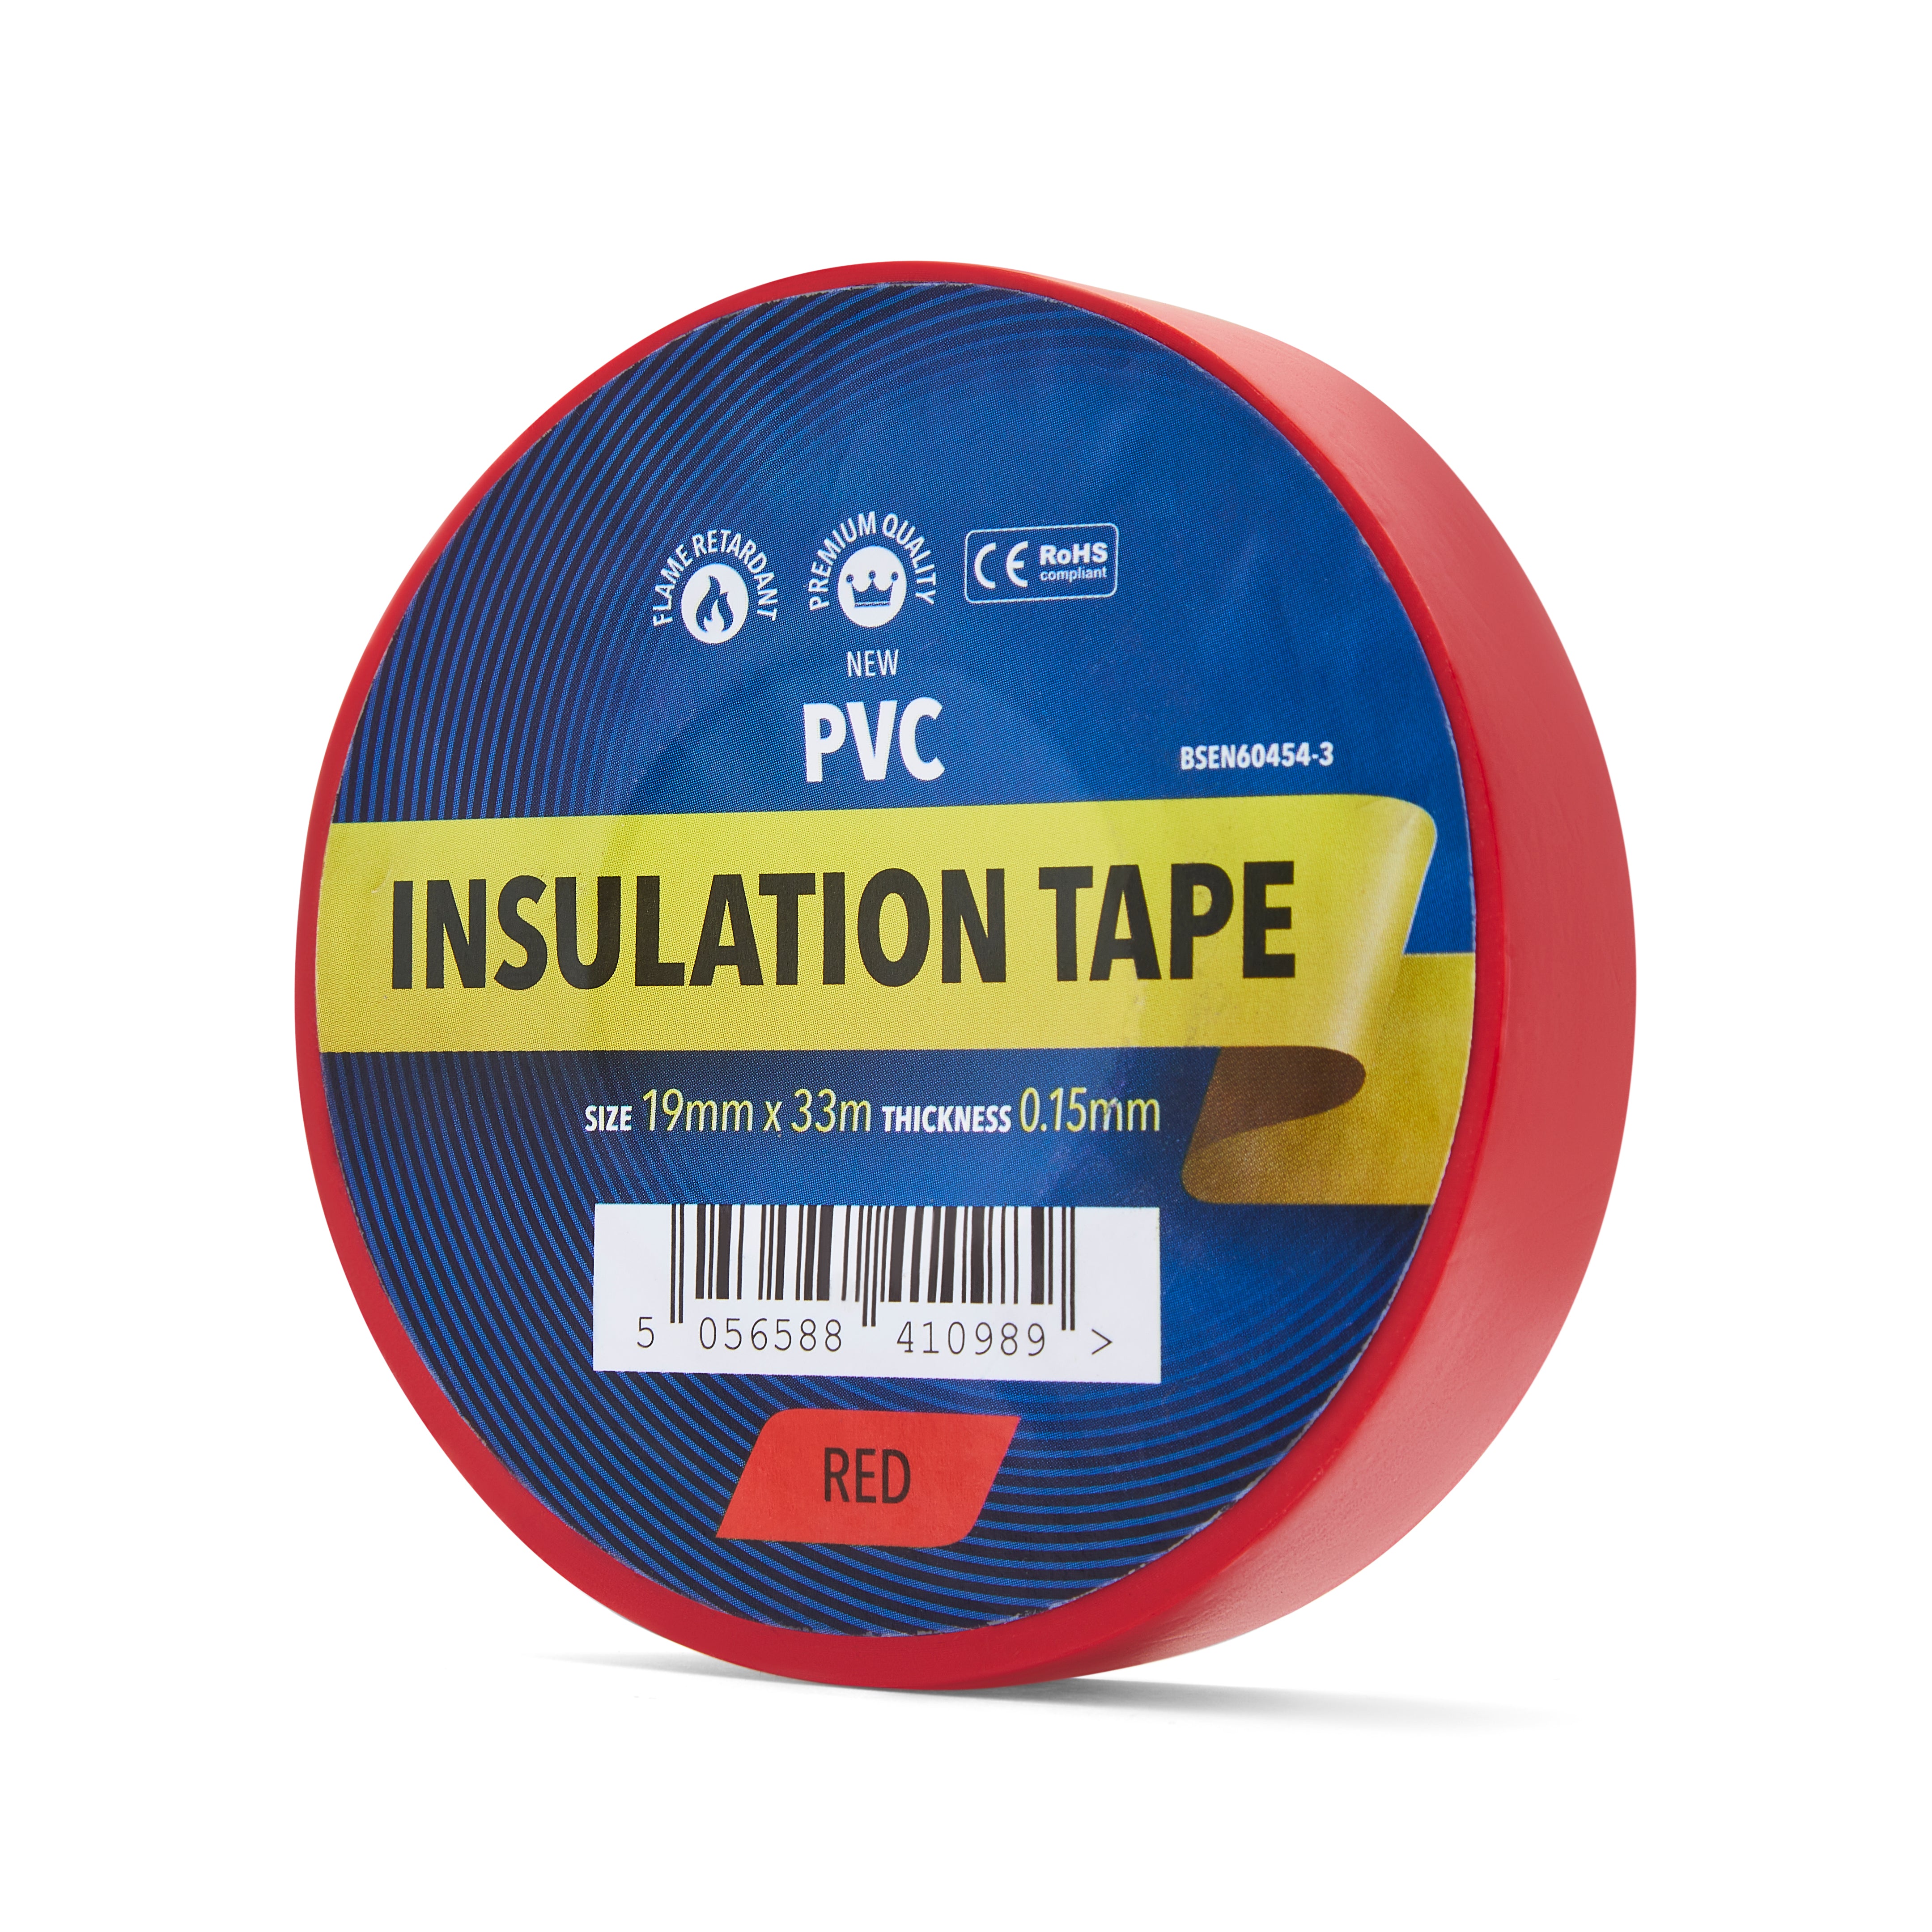 Red Electrical Tape 19mm - PVC Insulation Tape